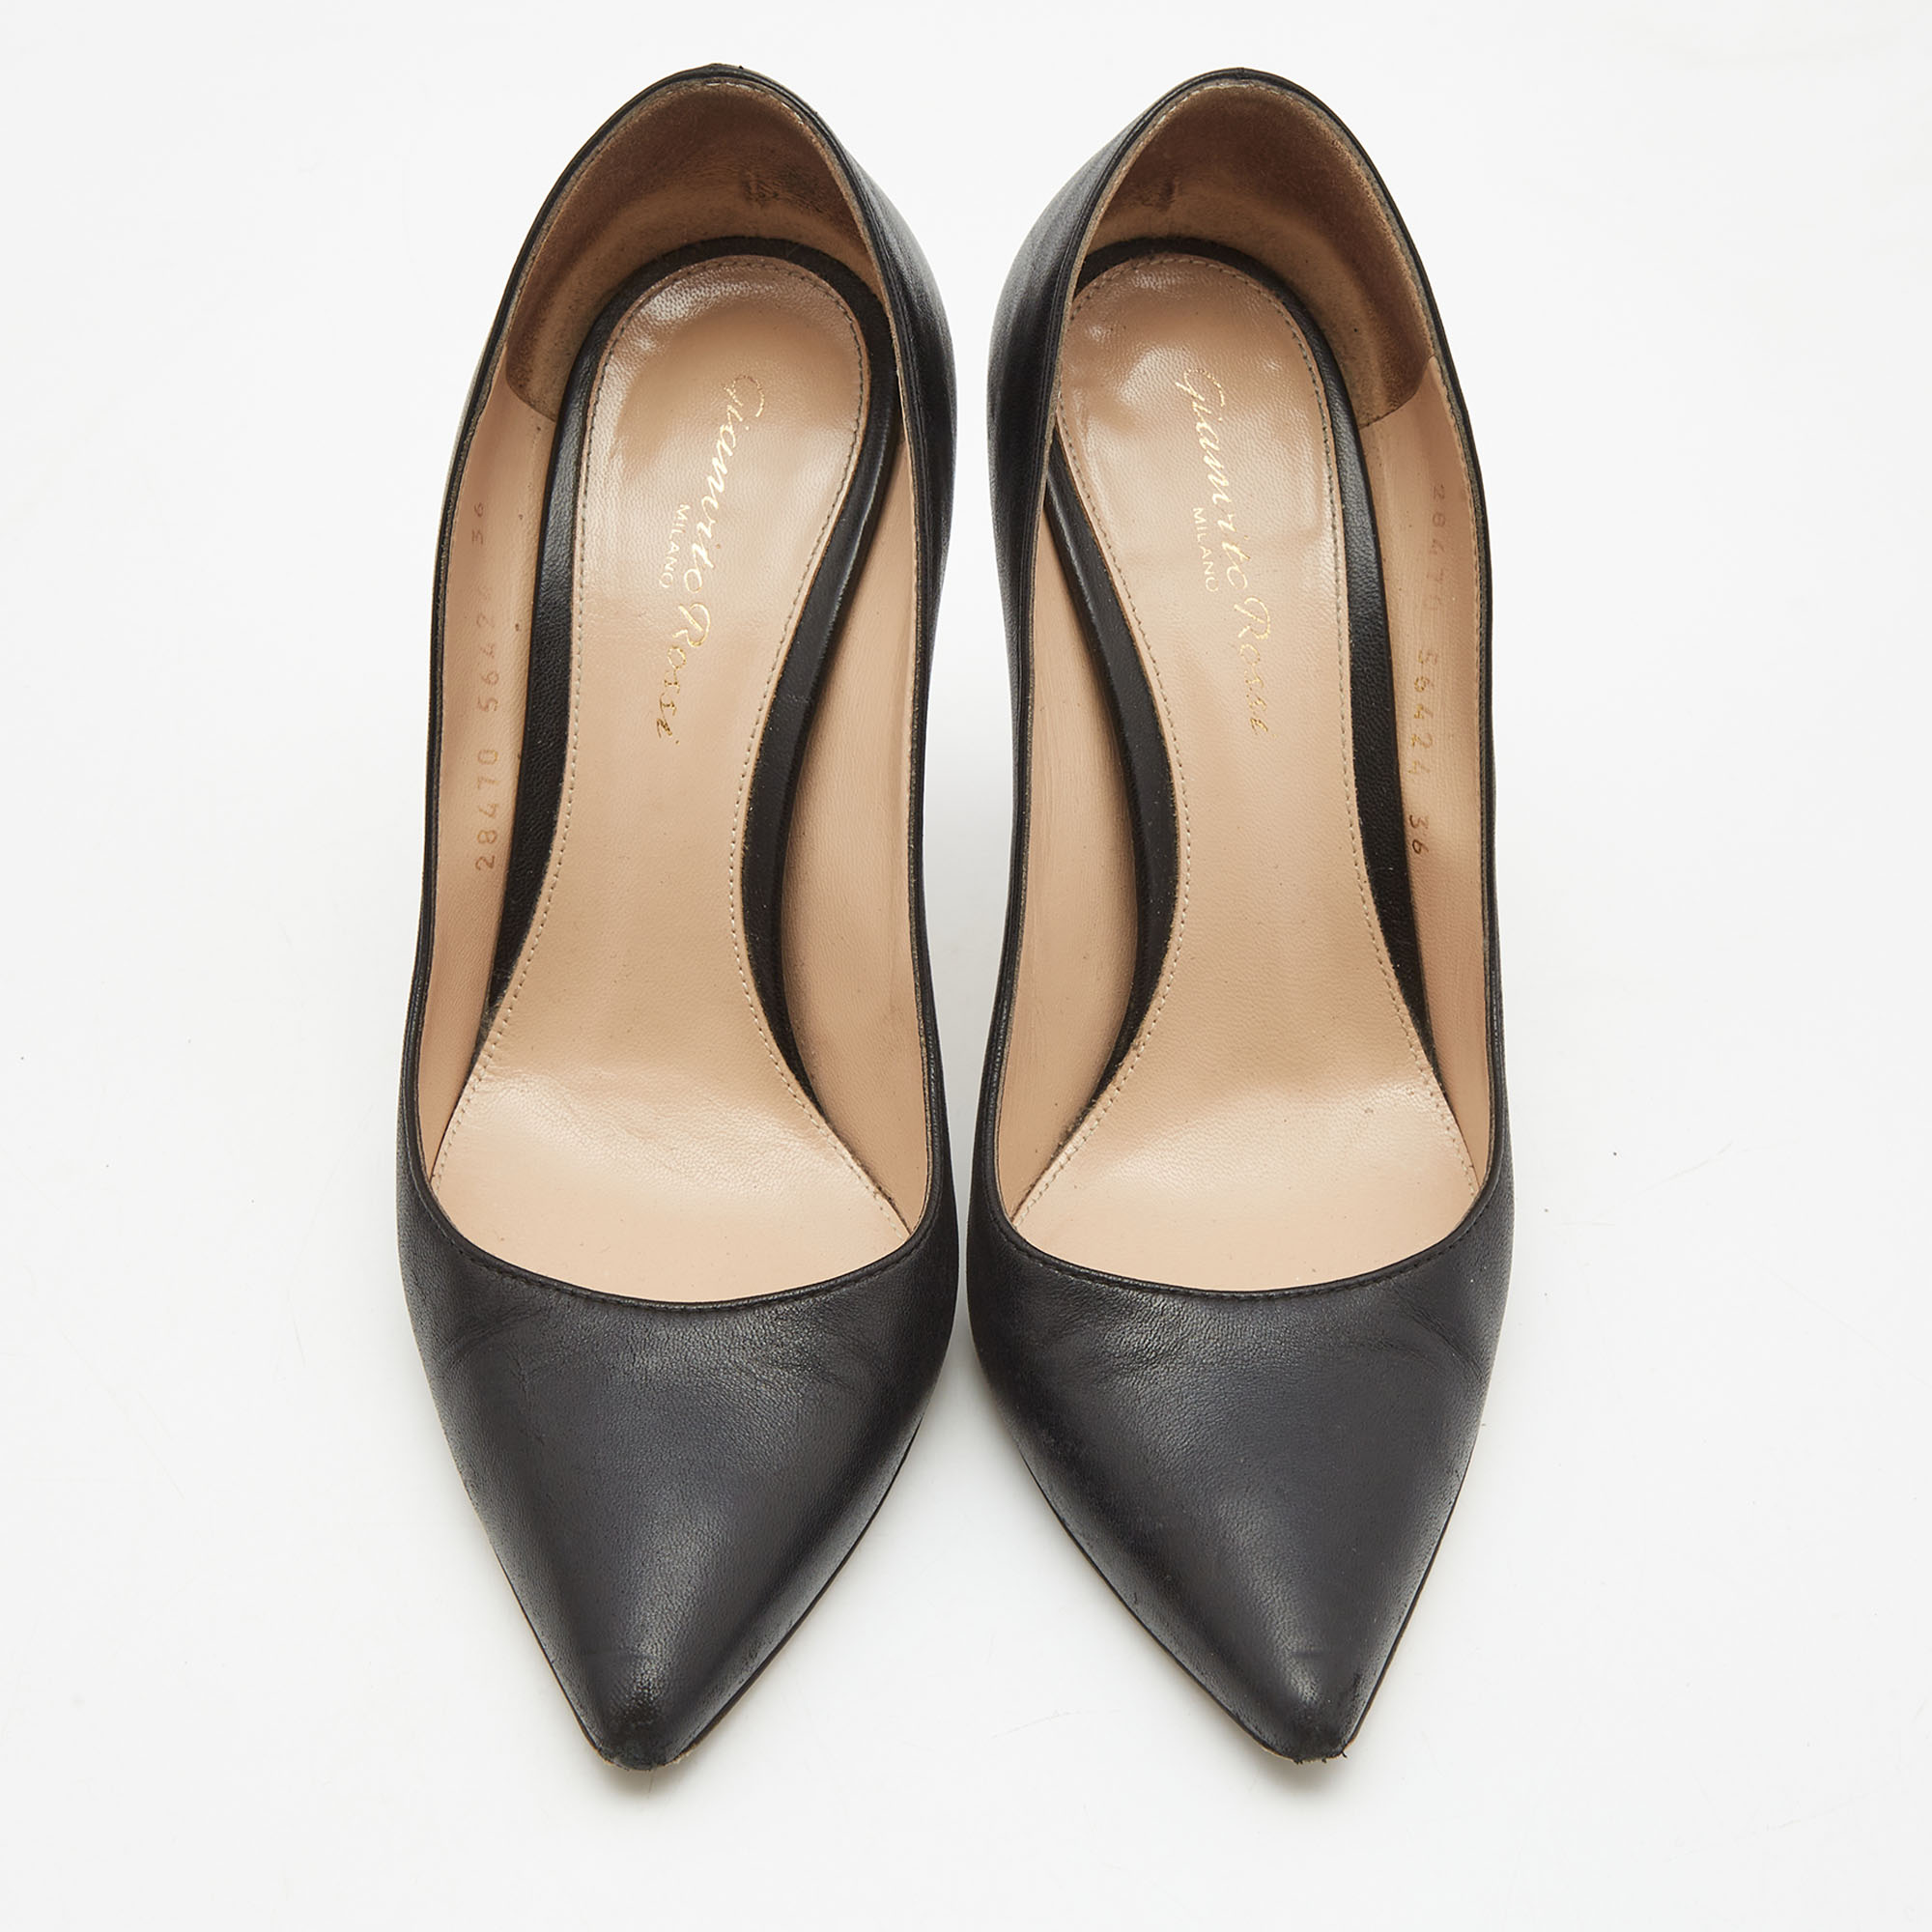 Gianvito Rossi Black Leather Pointed Toe Pumps Size 36